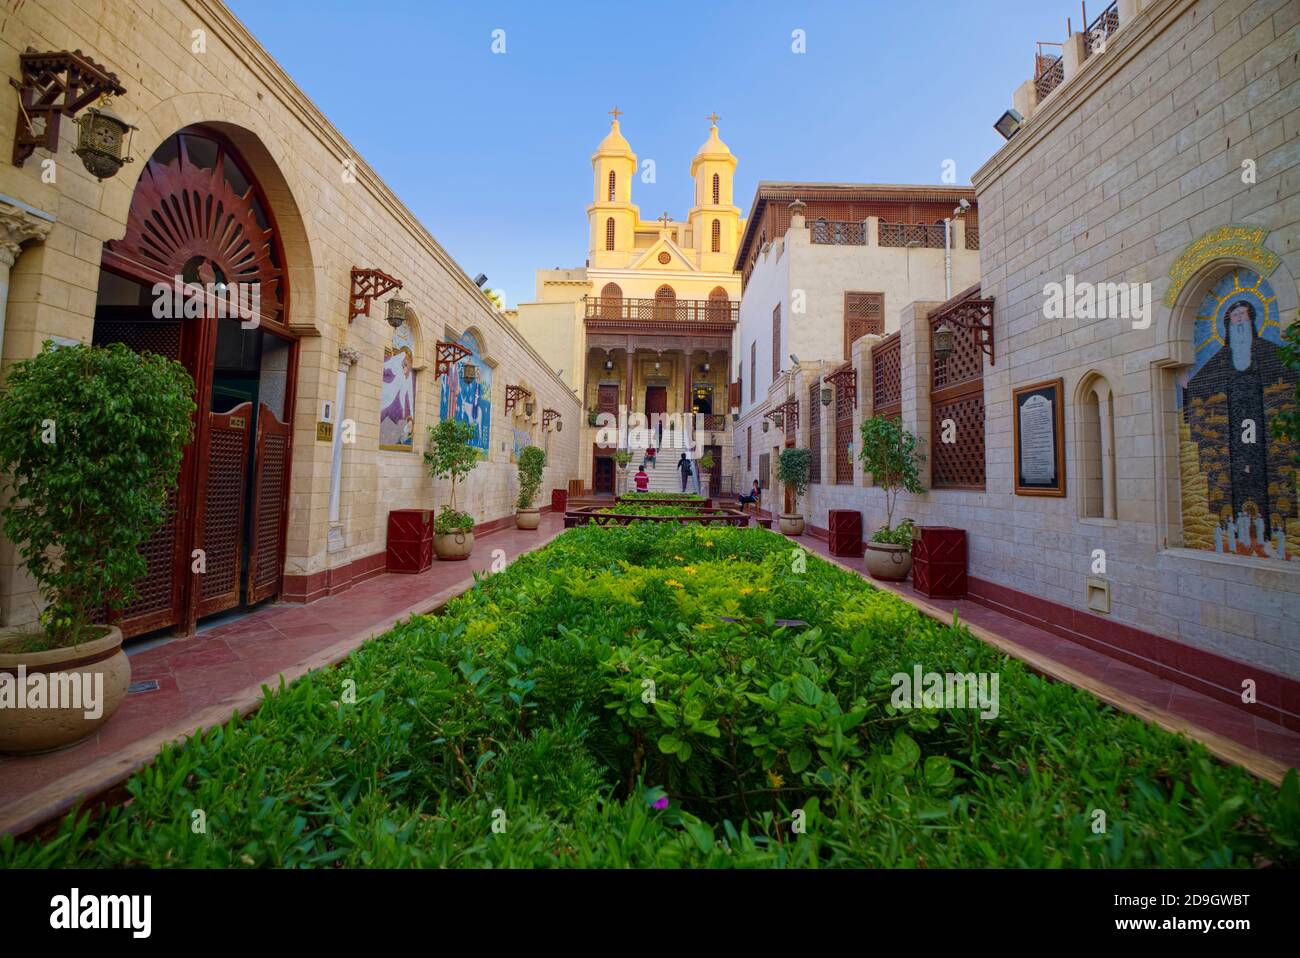 Saint Virgin Mary's Coptic Orthodox Church also known as the Hanging Church is one of the oldest churches in Egypt and the history of a church on this Stock Photo